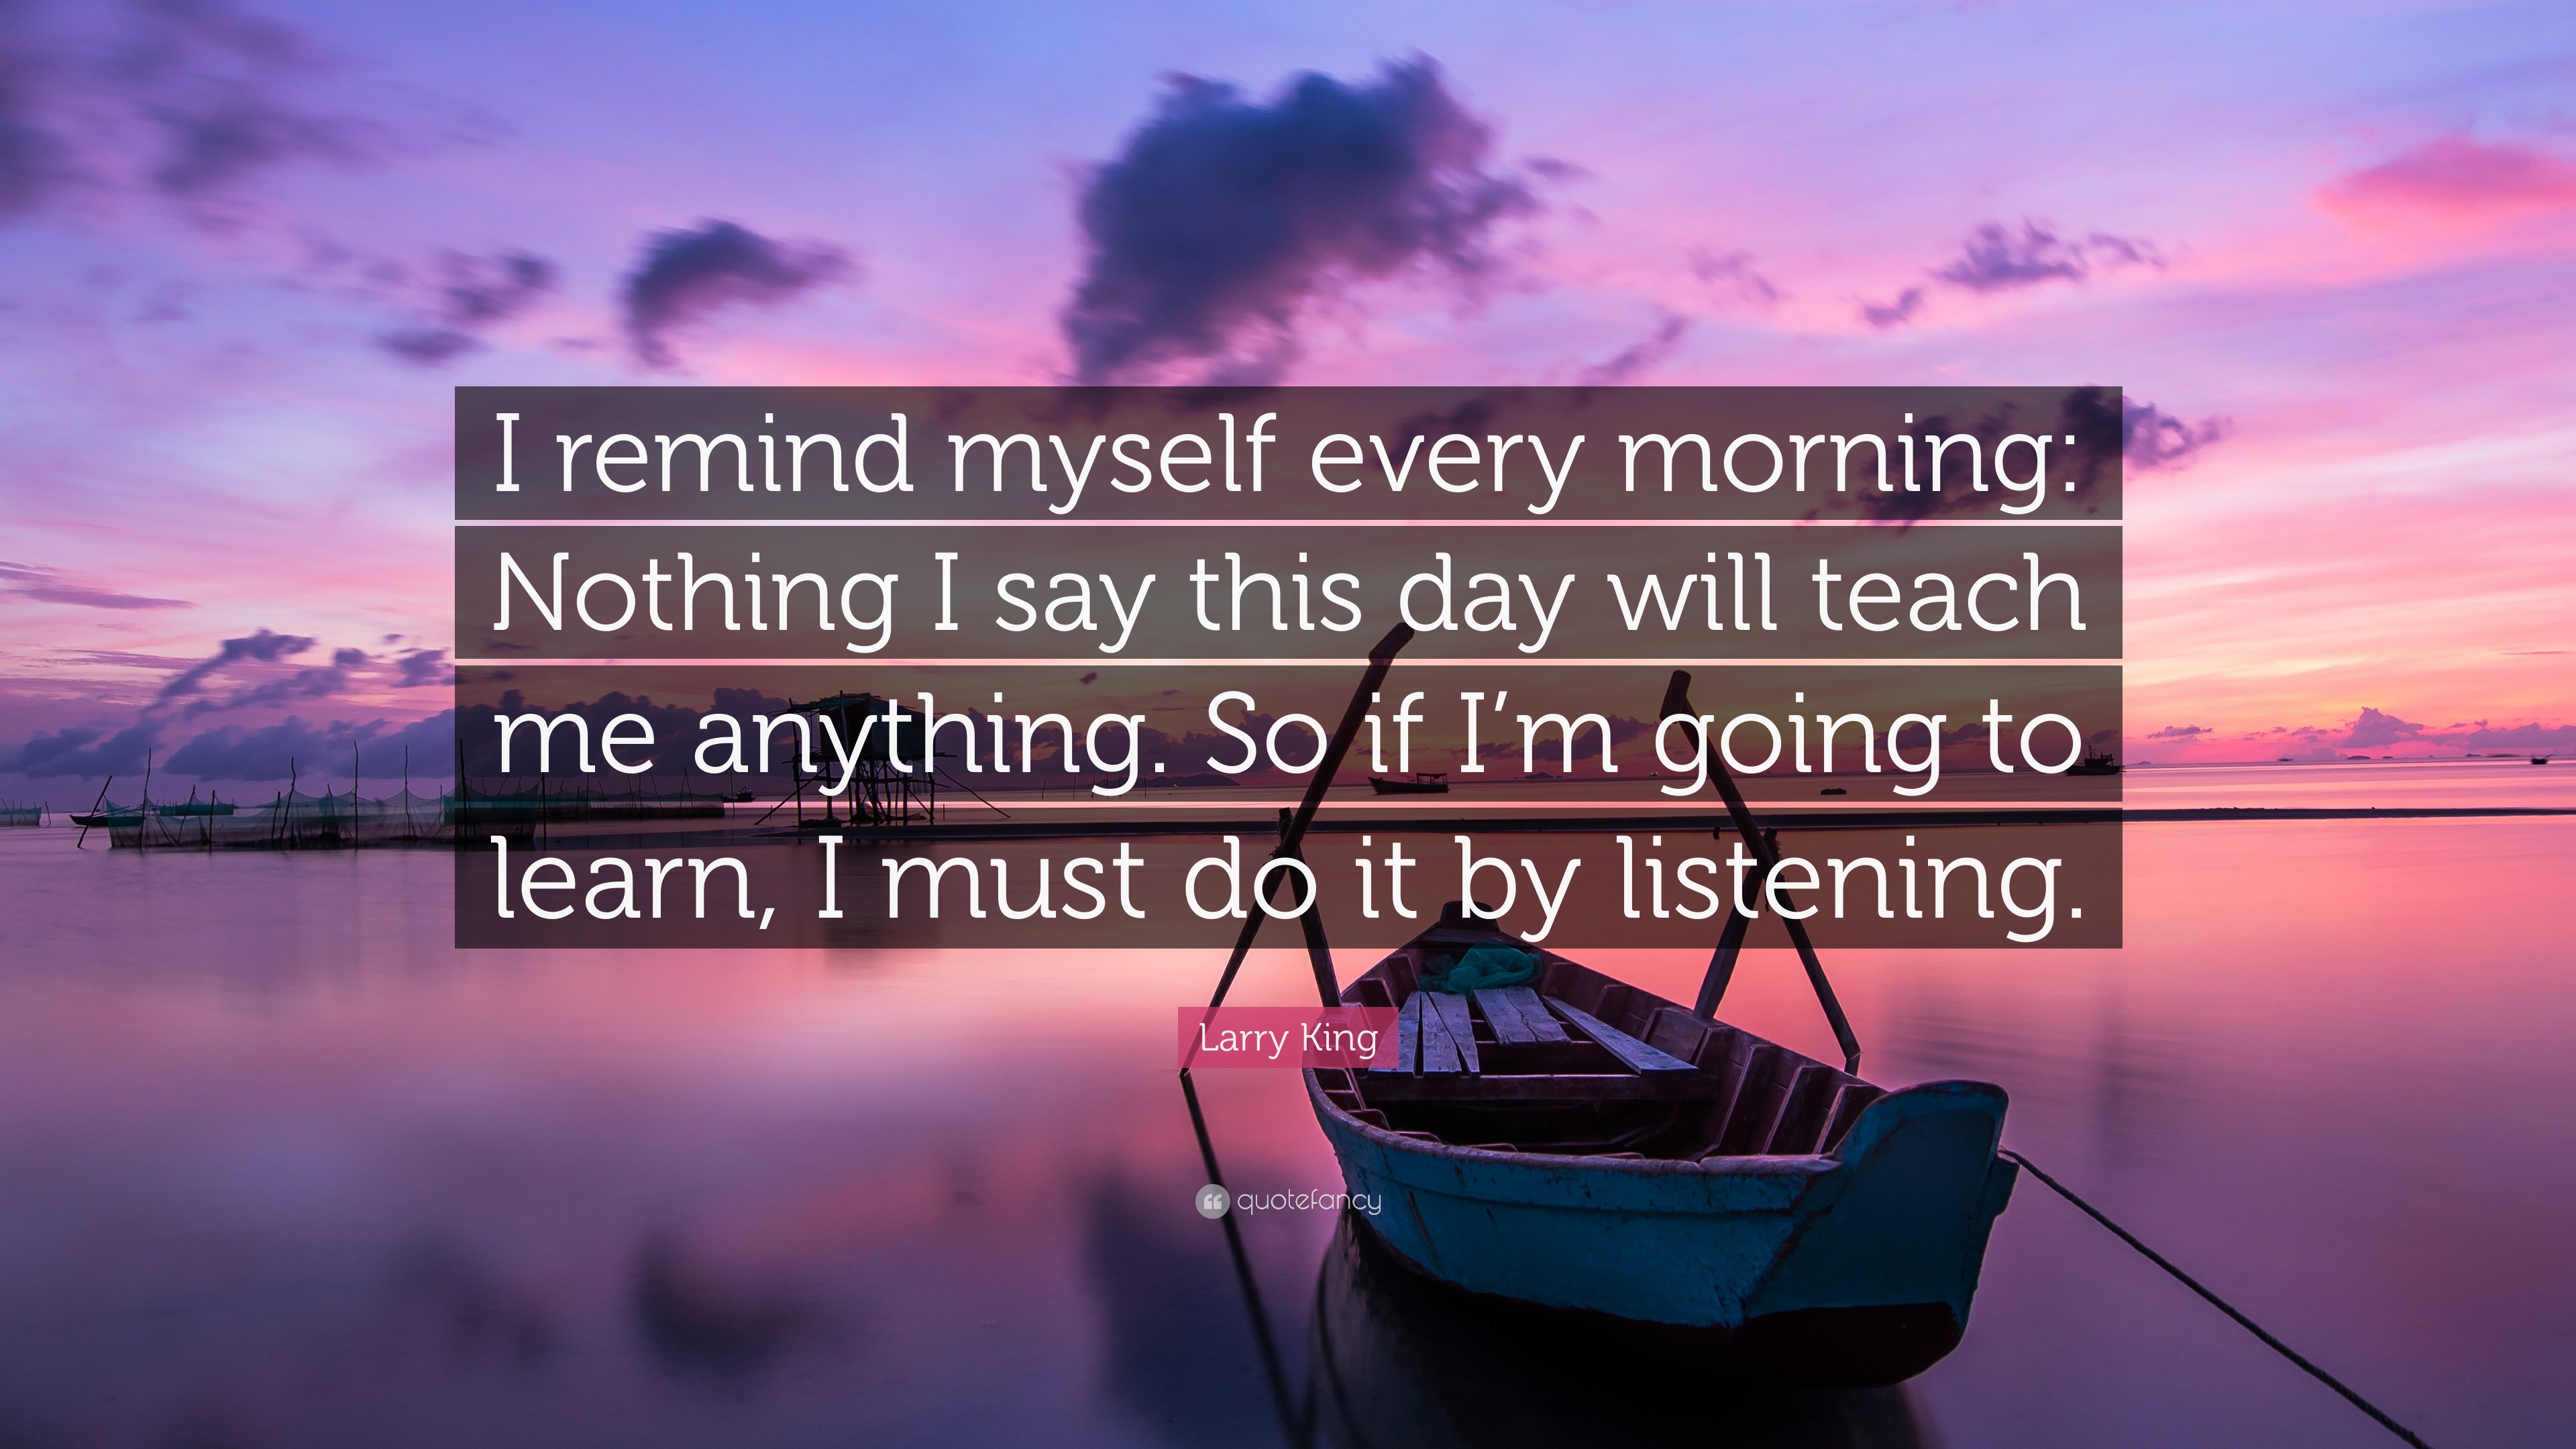 Larry King Quote: “I remind myself every morning: Nothing I say this ...